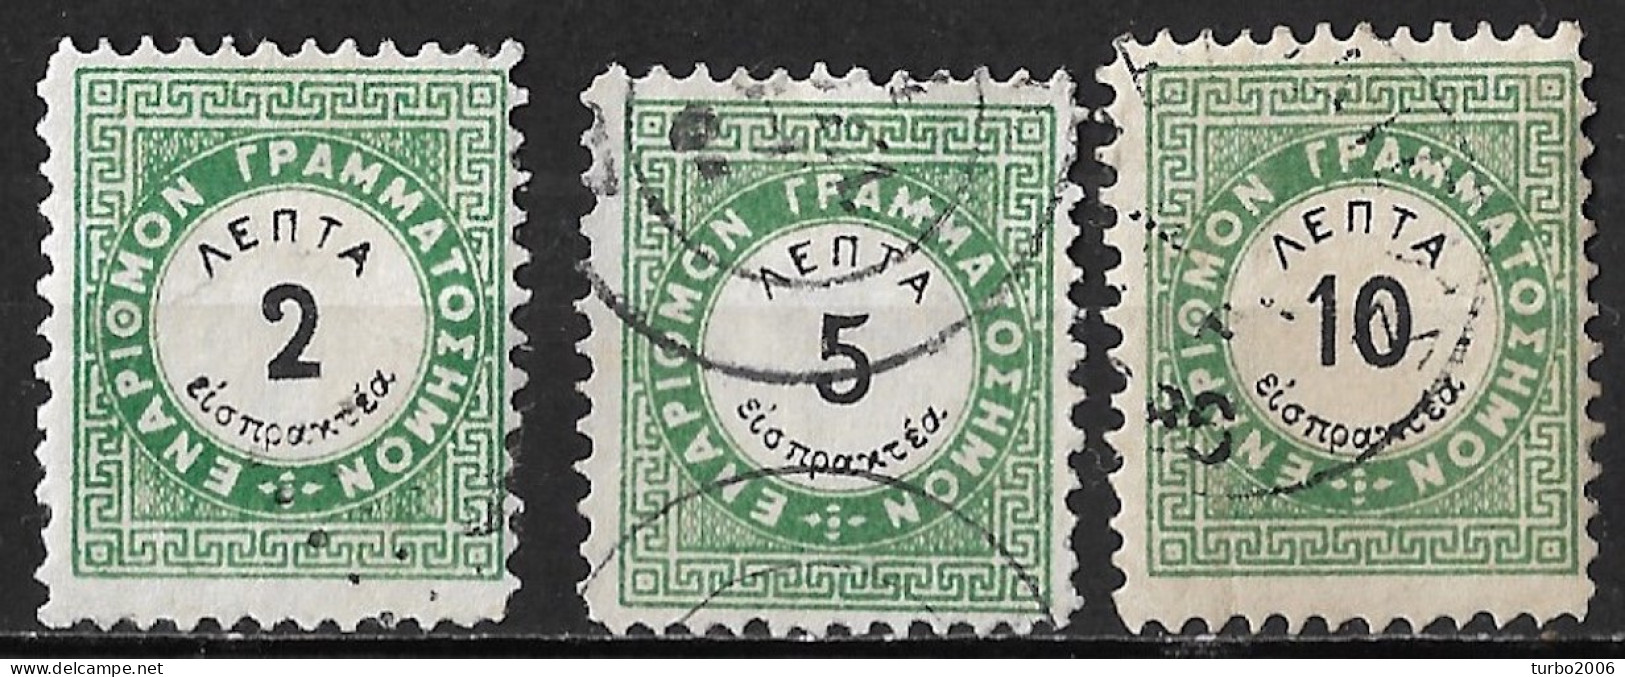 GREECE 1875 Postage Due Vienna Issue I Small Capitals 2-5-10 L. Green / Black Perforation 10½ Vl. D 2 A - D 3 A - D 4 A - Gebraucht